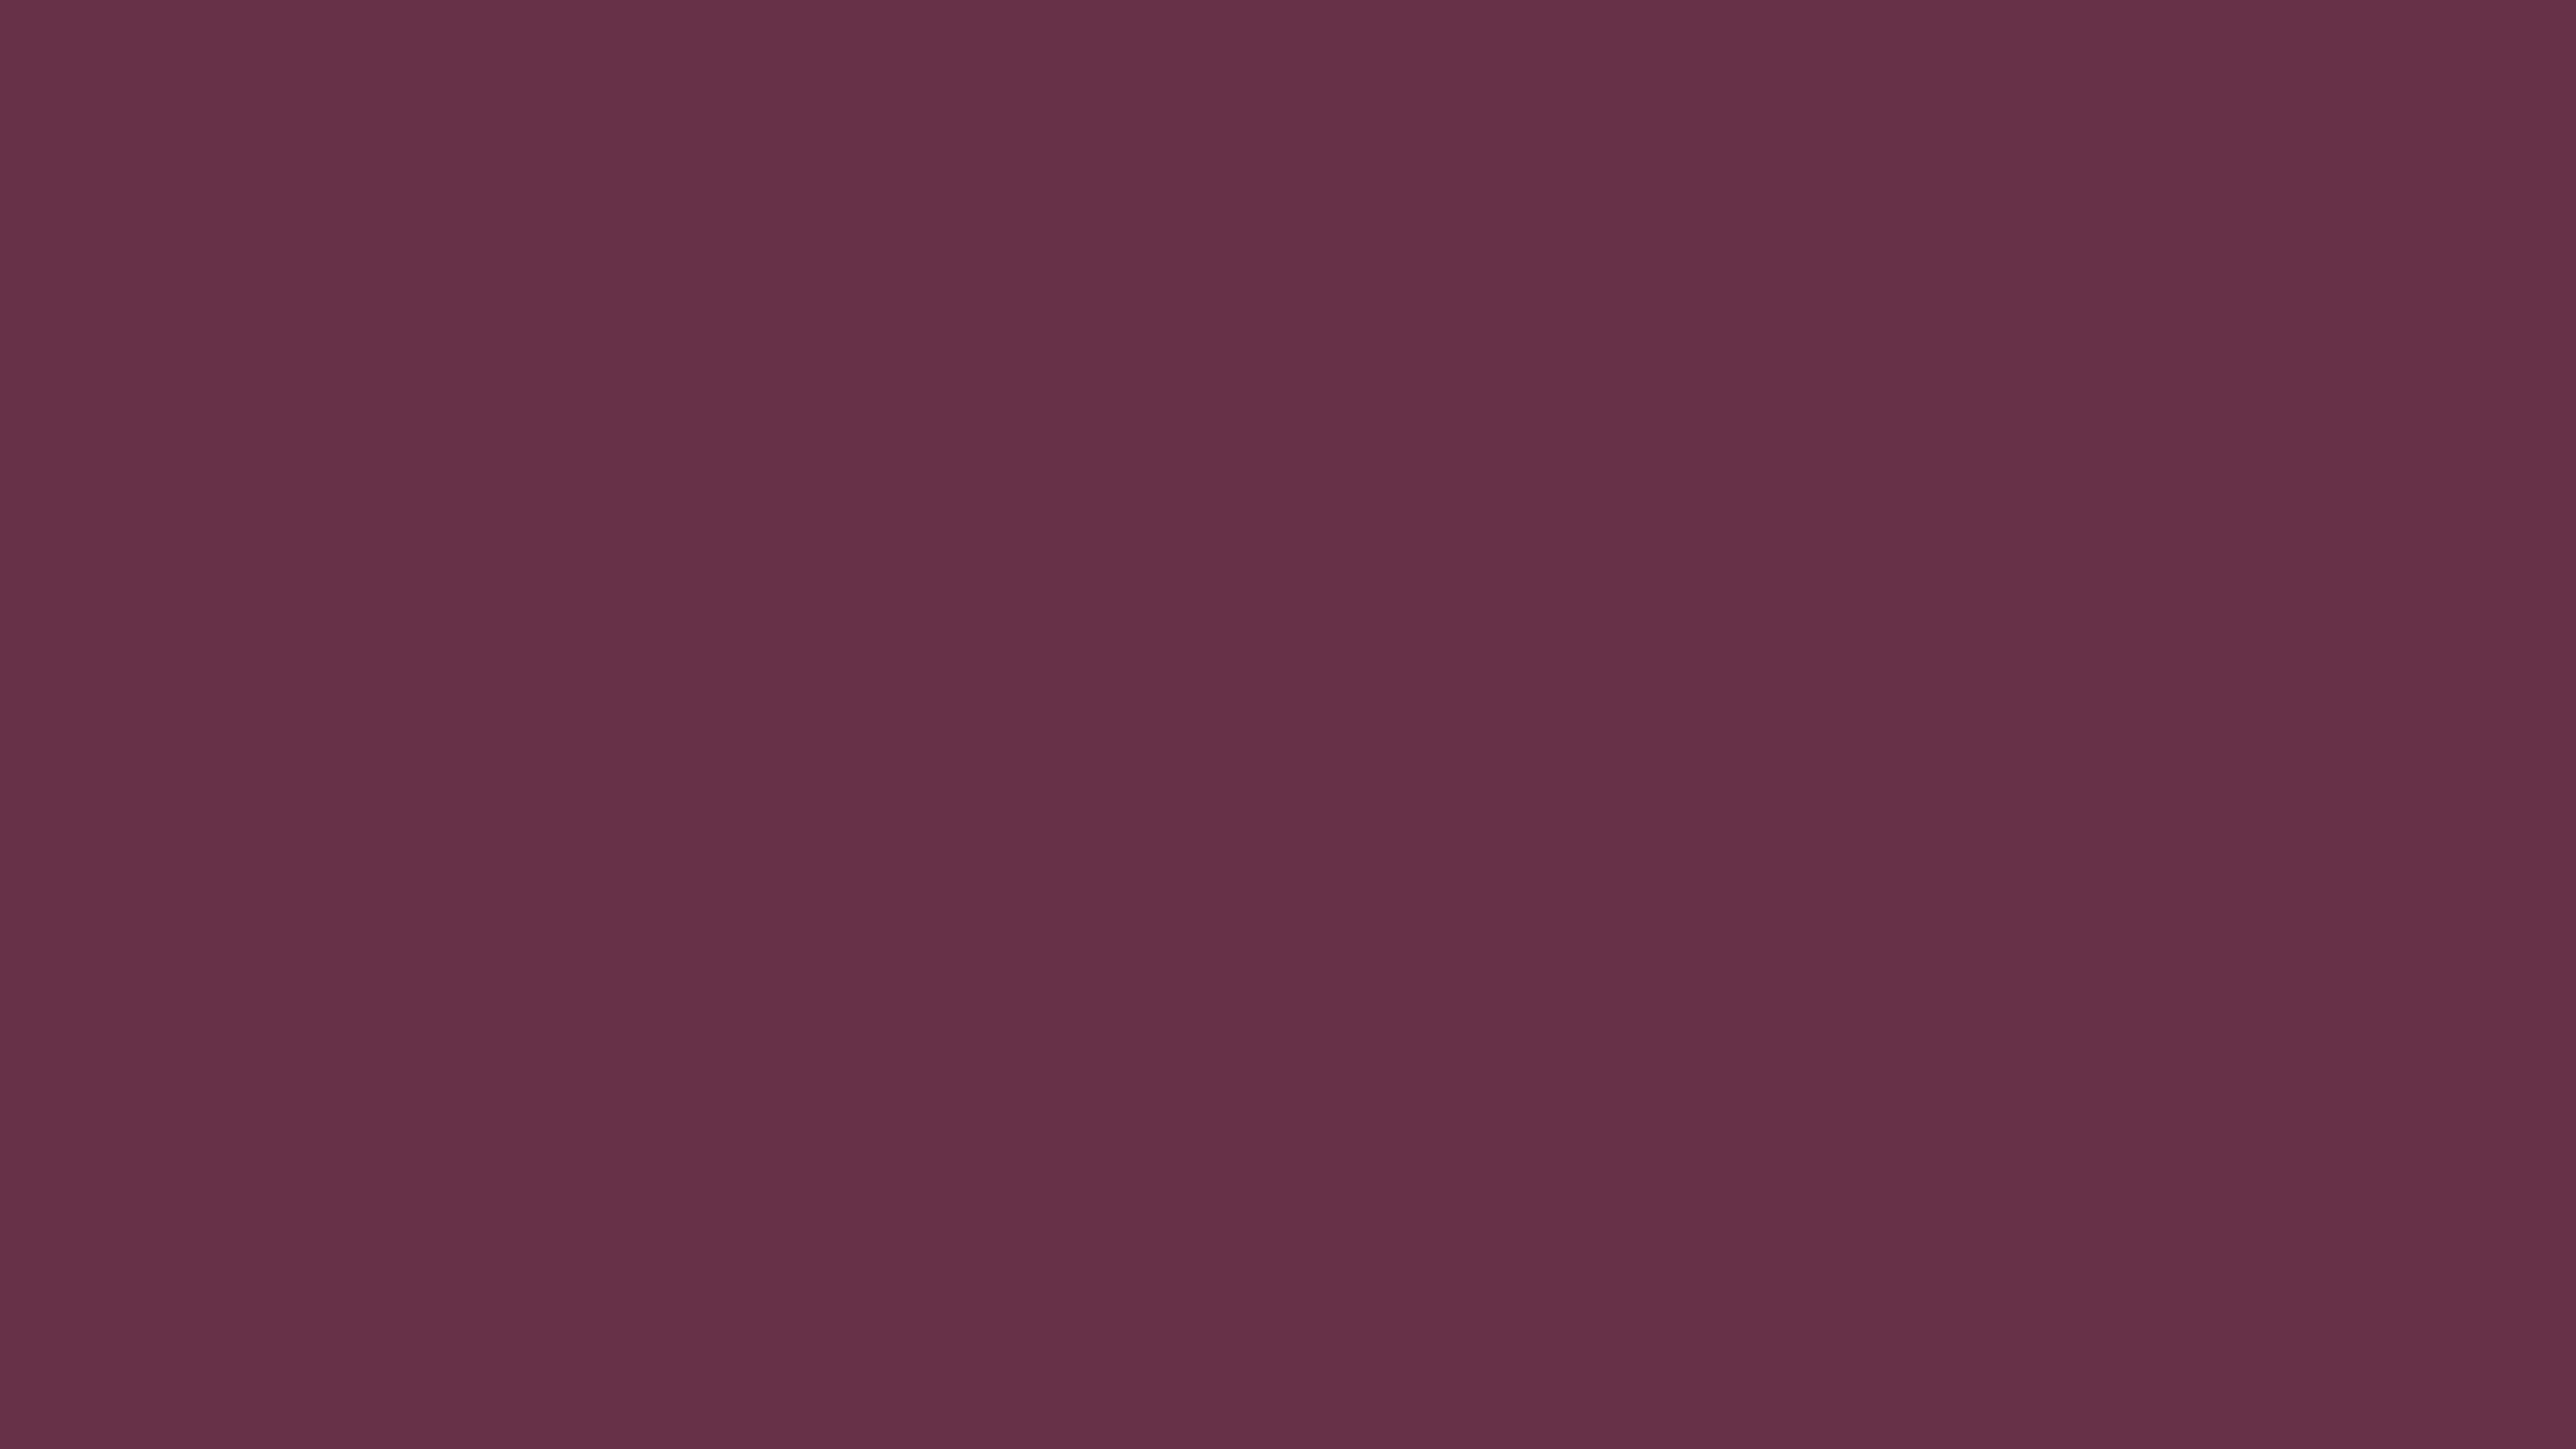 3840x2160 Wine Dregs Solid Color Background